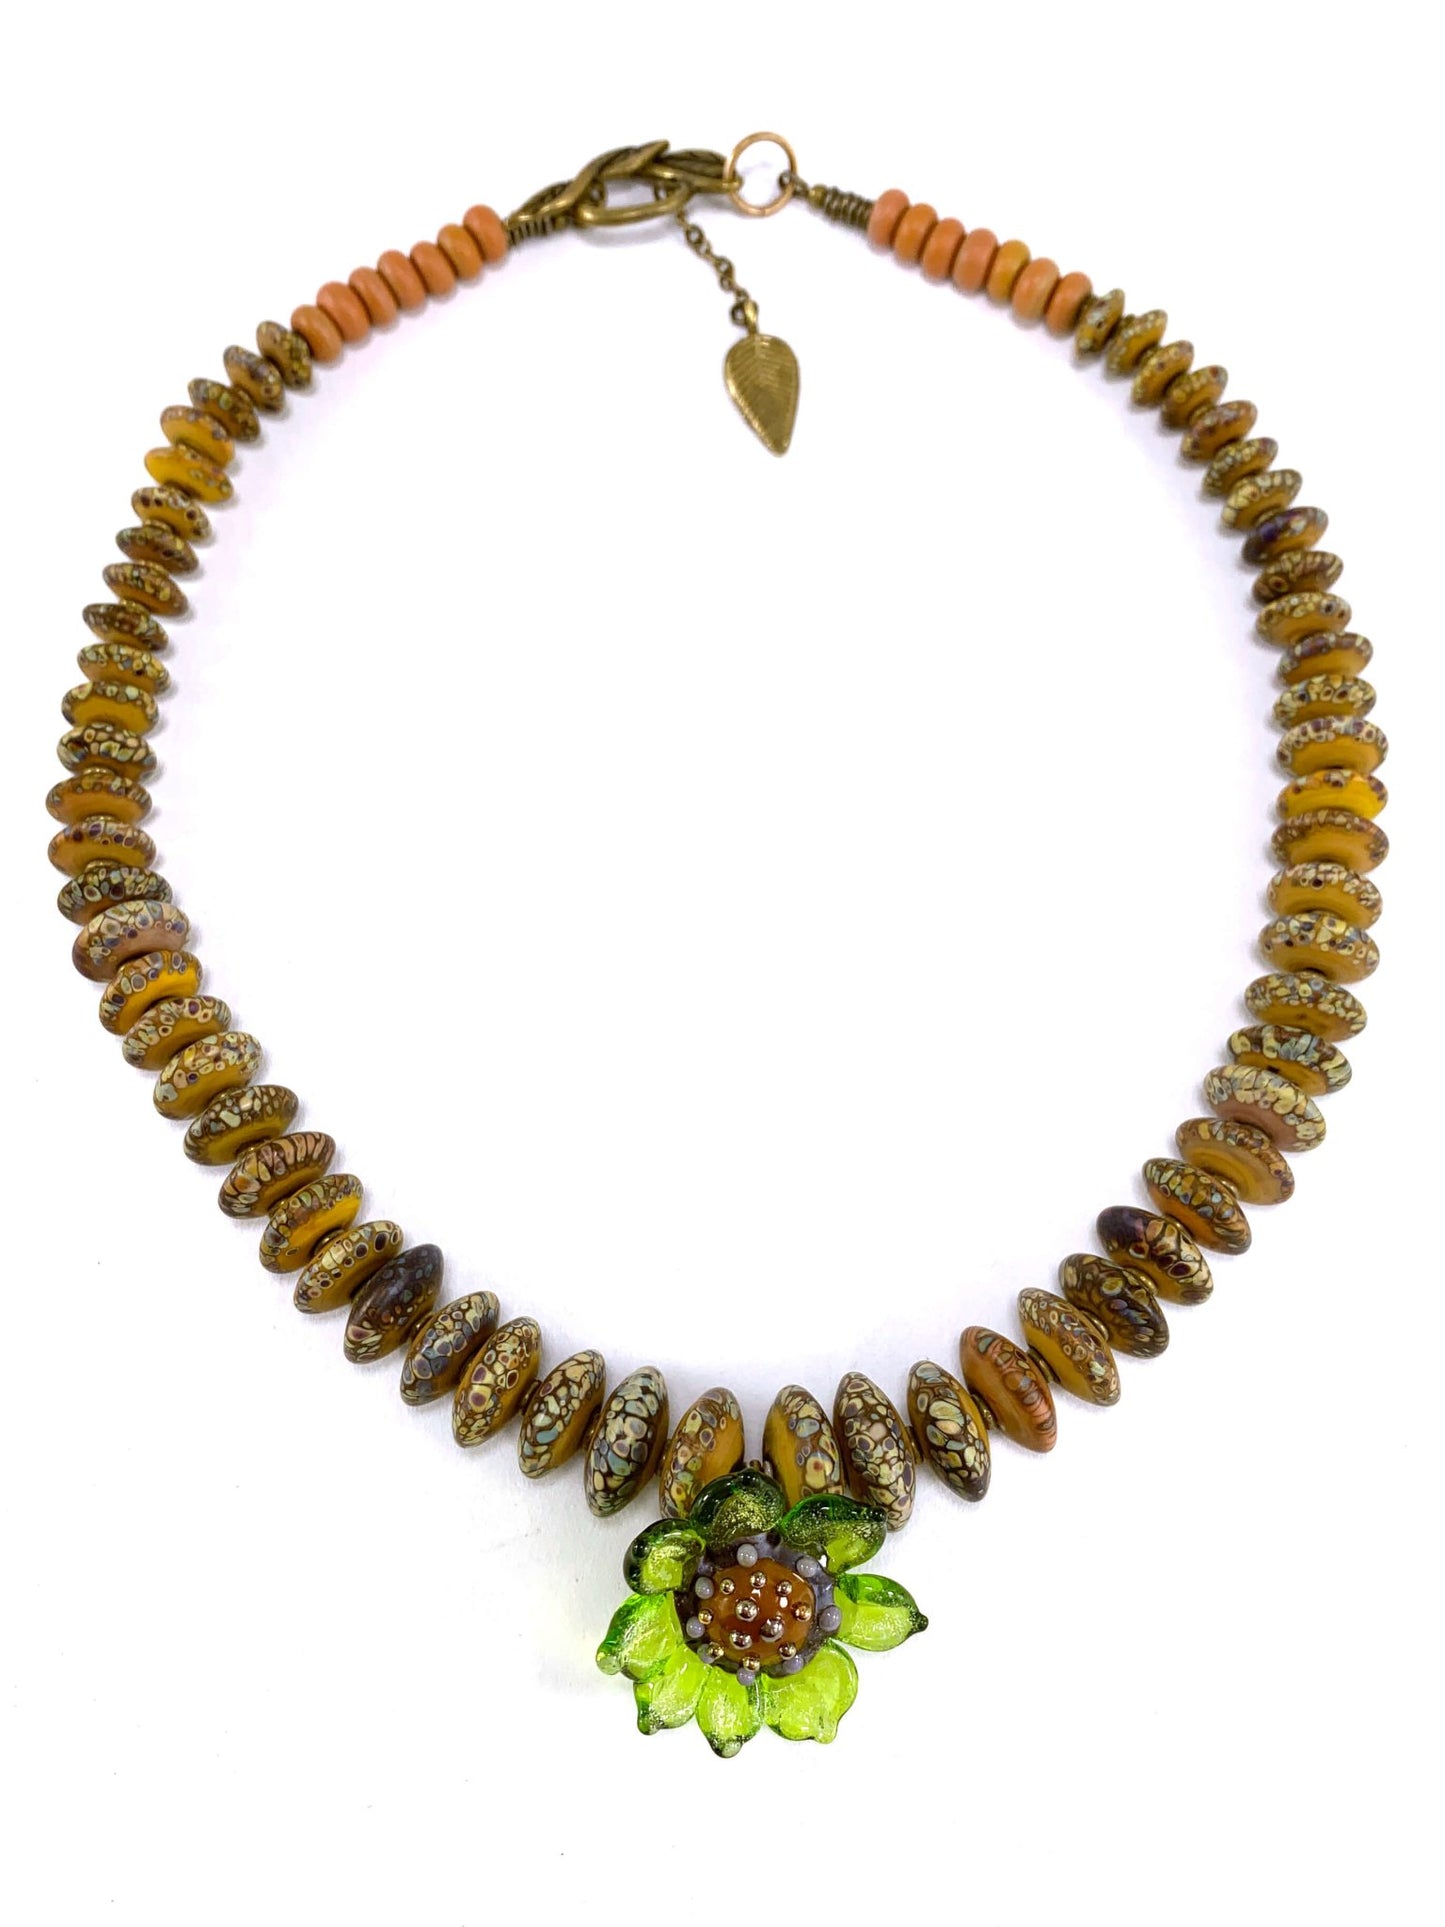 Disc Bead Necklace with Removable Flower Slide - The Glass Acorn